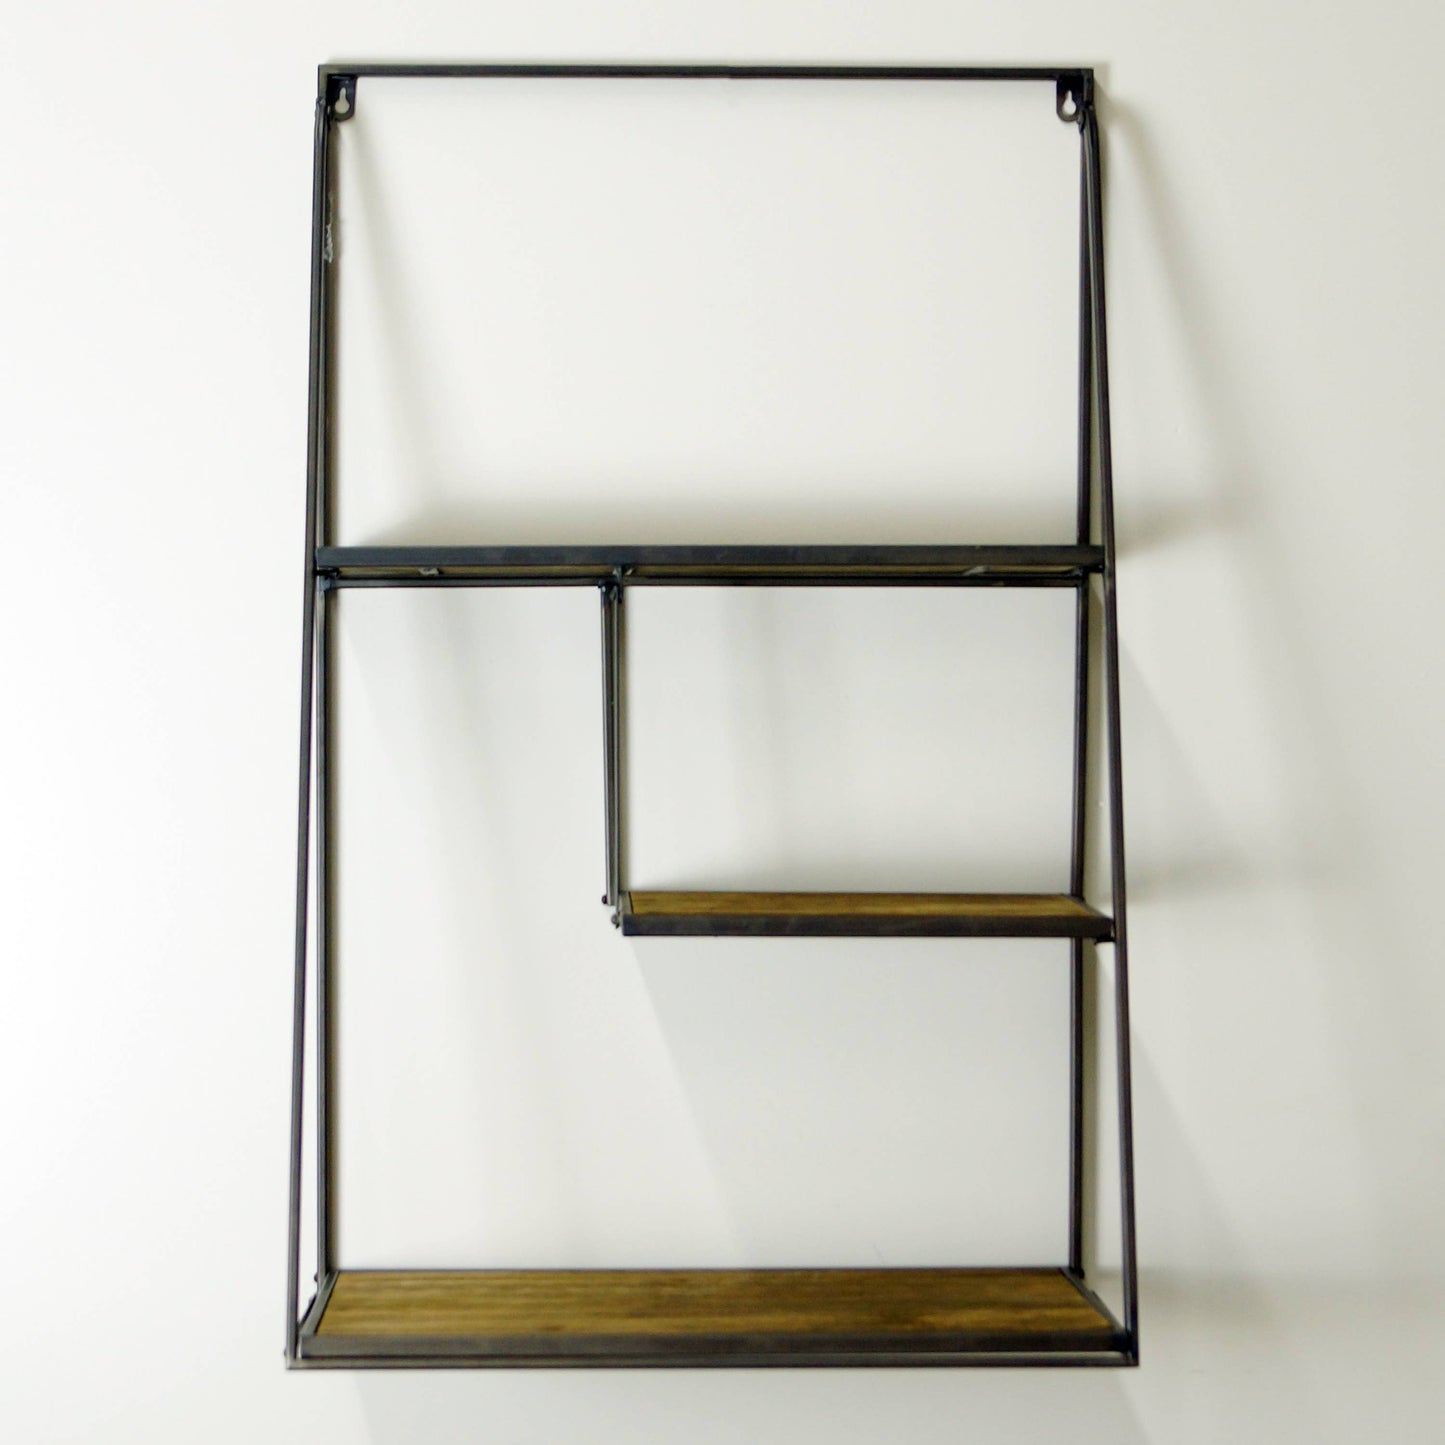 Vertical Wall Shelf, The Feathered Farmhouse